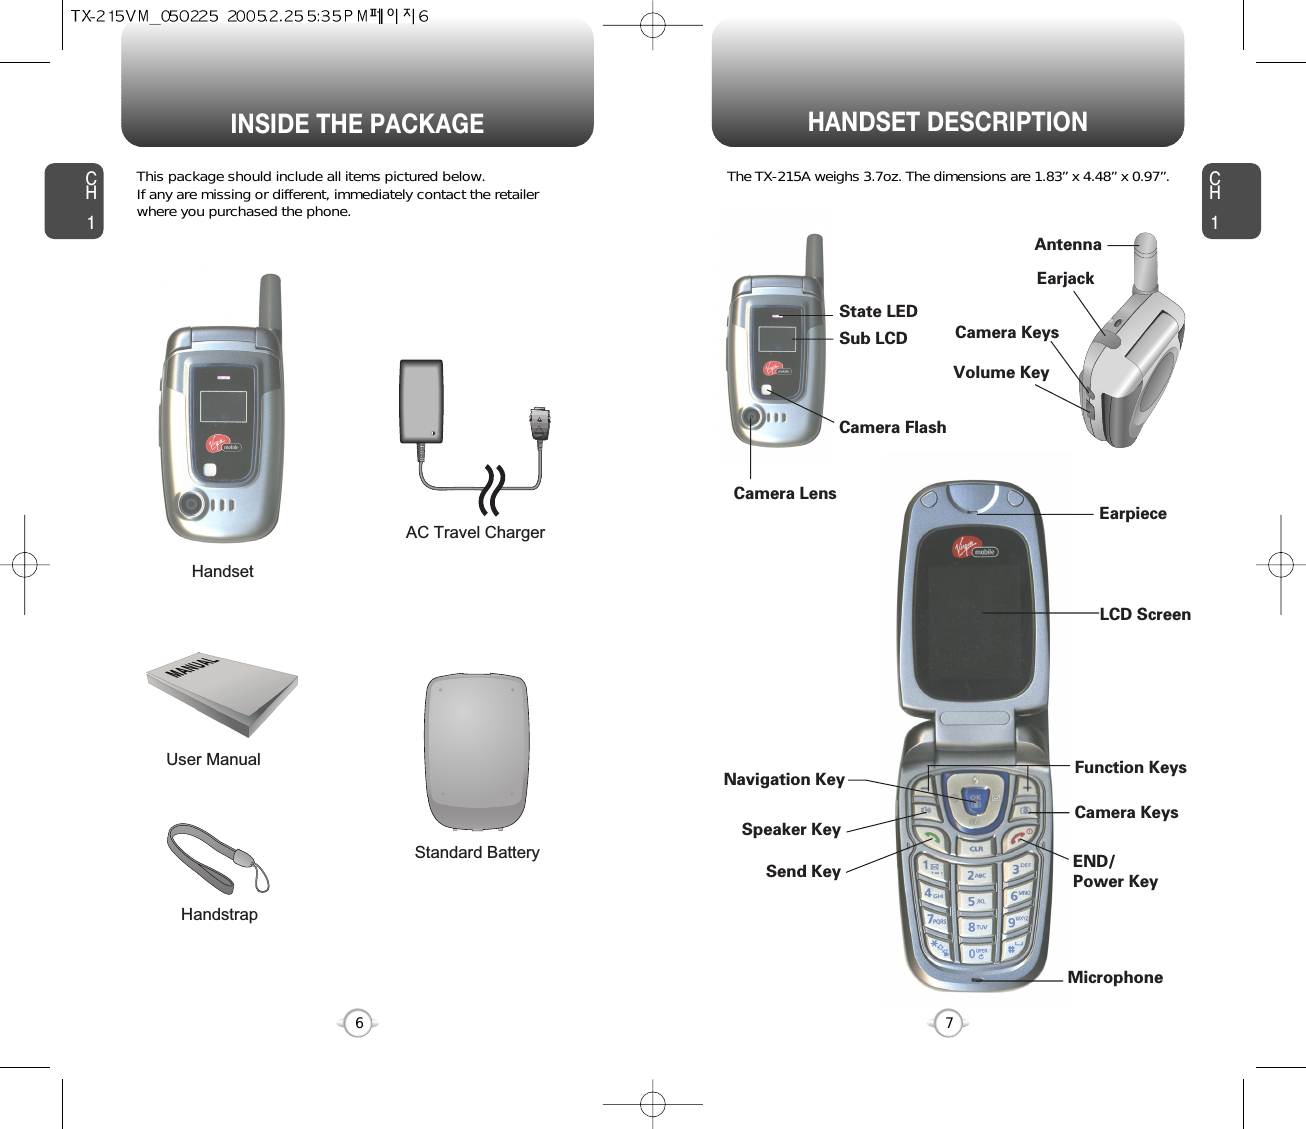 HANDSET DESCRIPTIONCH1This package should include all items pictured below. If any are missing or different, immediately contact the retailer where you purchased the phone.7INSIDE THE PACKAGECH16The TX-215A weighs 3.7oz. The dimensions are 1.83” x 4.48” x 0.97”.HandstrapUser ManualAC Travel ChargerHandsetStandard BatteryAntennaEarjackCamera KeysVolume KeyLCD ScreenFunction KeysCamera KeysEND/Power KeyMicrophoneEarpieceNavigation KeyCamera LensCamera FlashSub LCDState LEDSend KeySpeaker Key